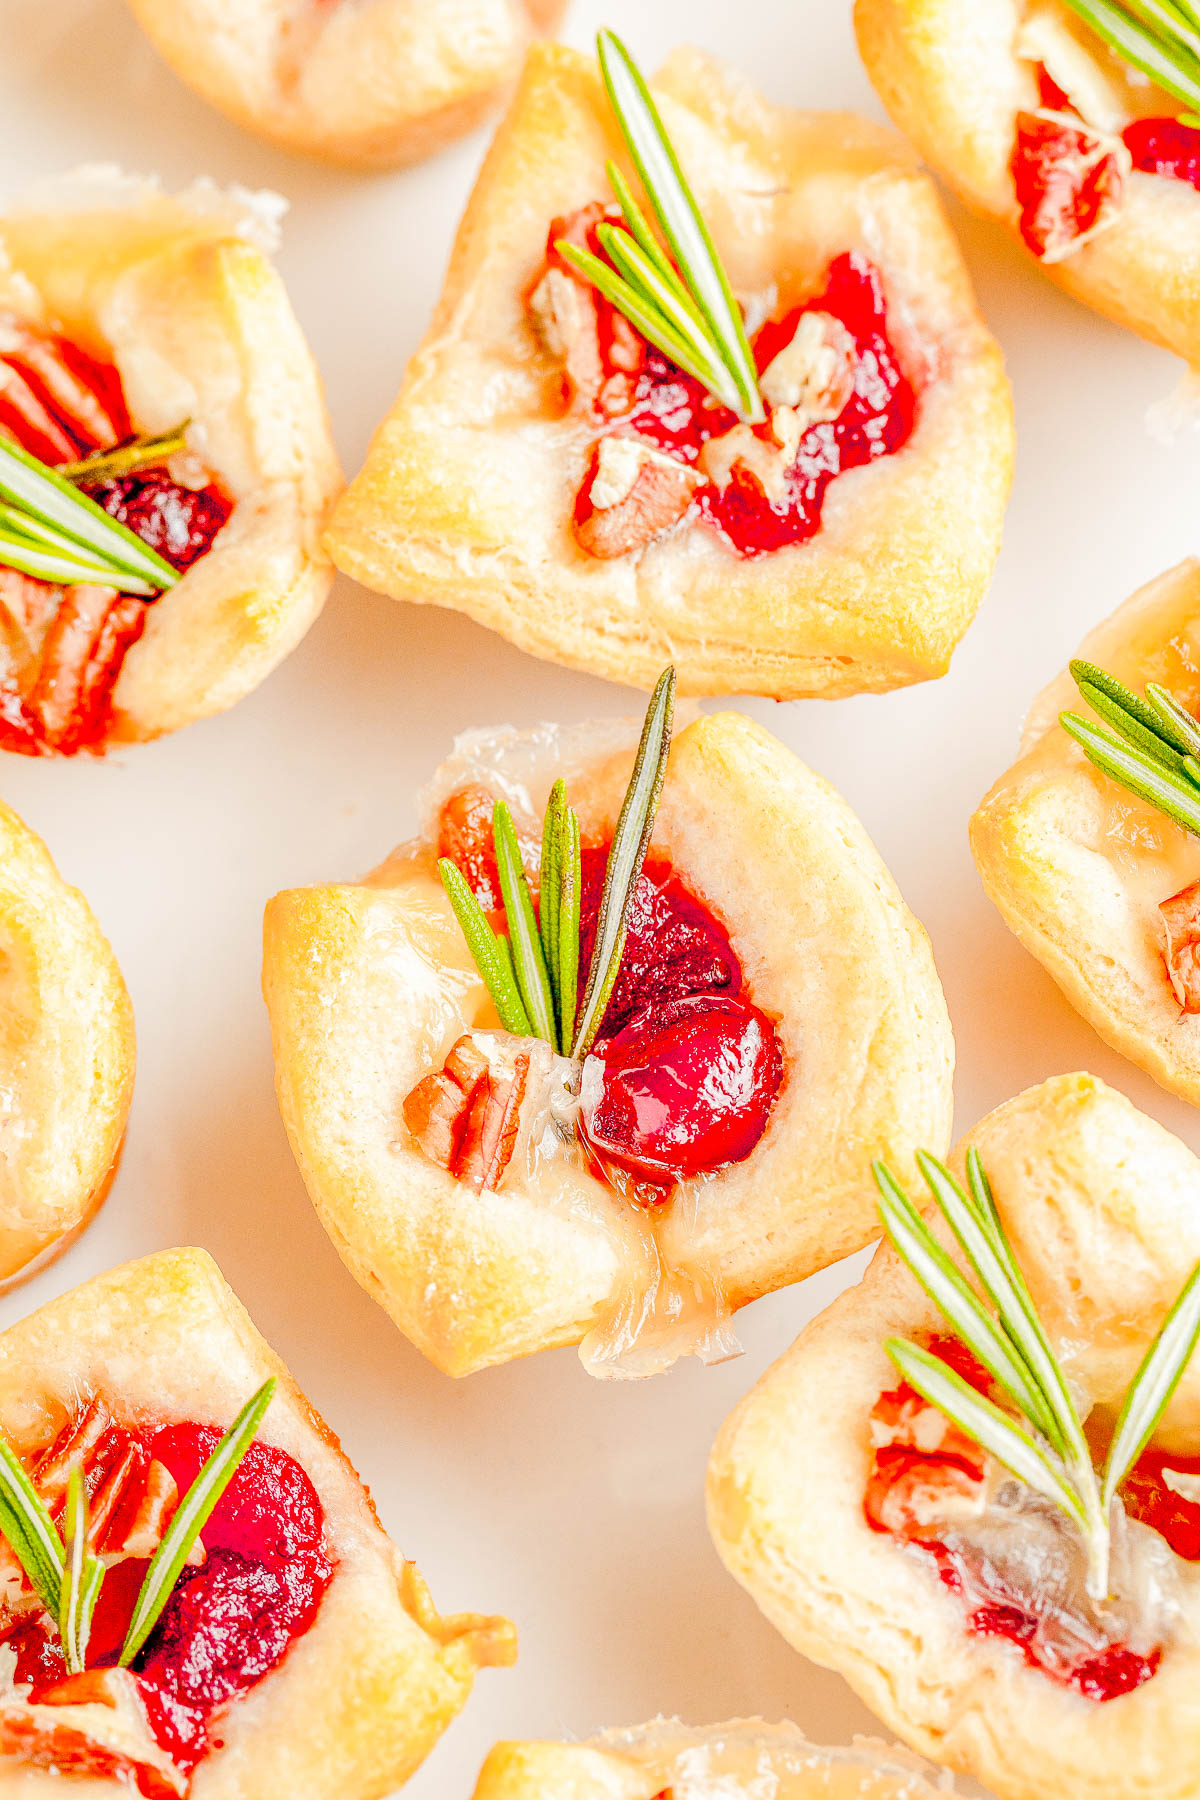 Cranberry Brie Bites - The perfect two-bite holiday appetizer recipe with melted brie cheese, sweet-tart cranberry sauce, and fresh rosemary all nestled inside a buttery soft crust! An EASY appetizer recipe with just 4 main ingredients that's ready in 30 minutes! PERFECT for Thanksgiving celebrations, holiday and Christmas parties, or for New Year's Eve! 